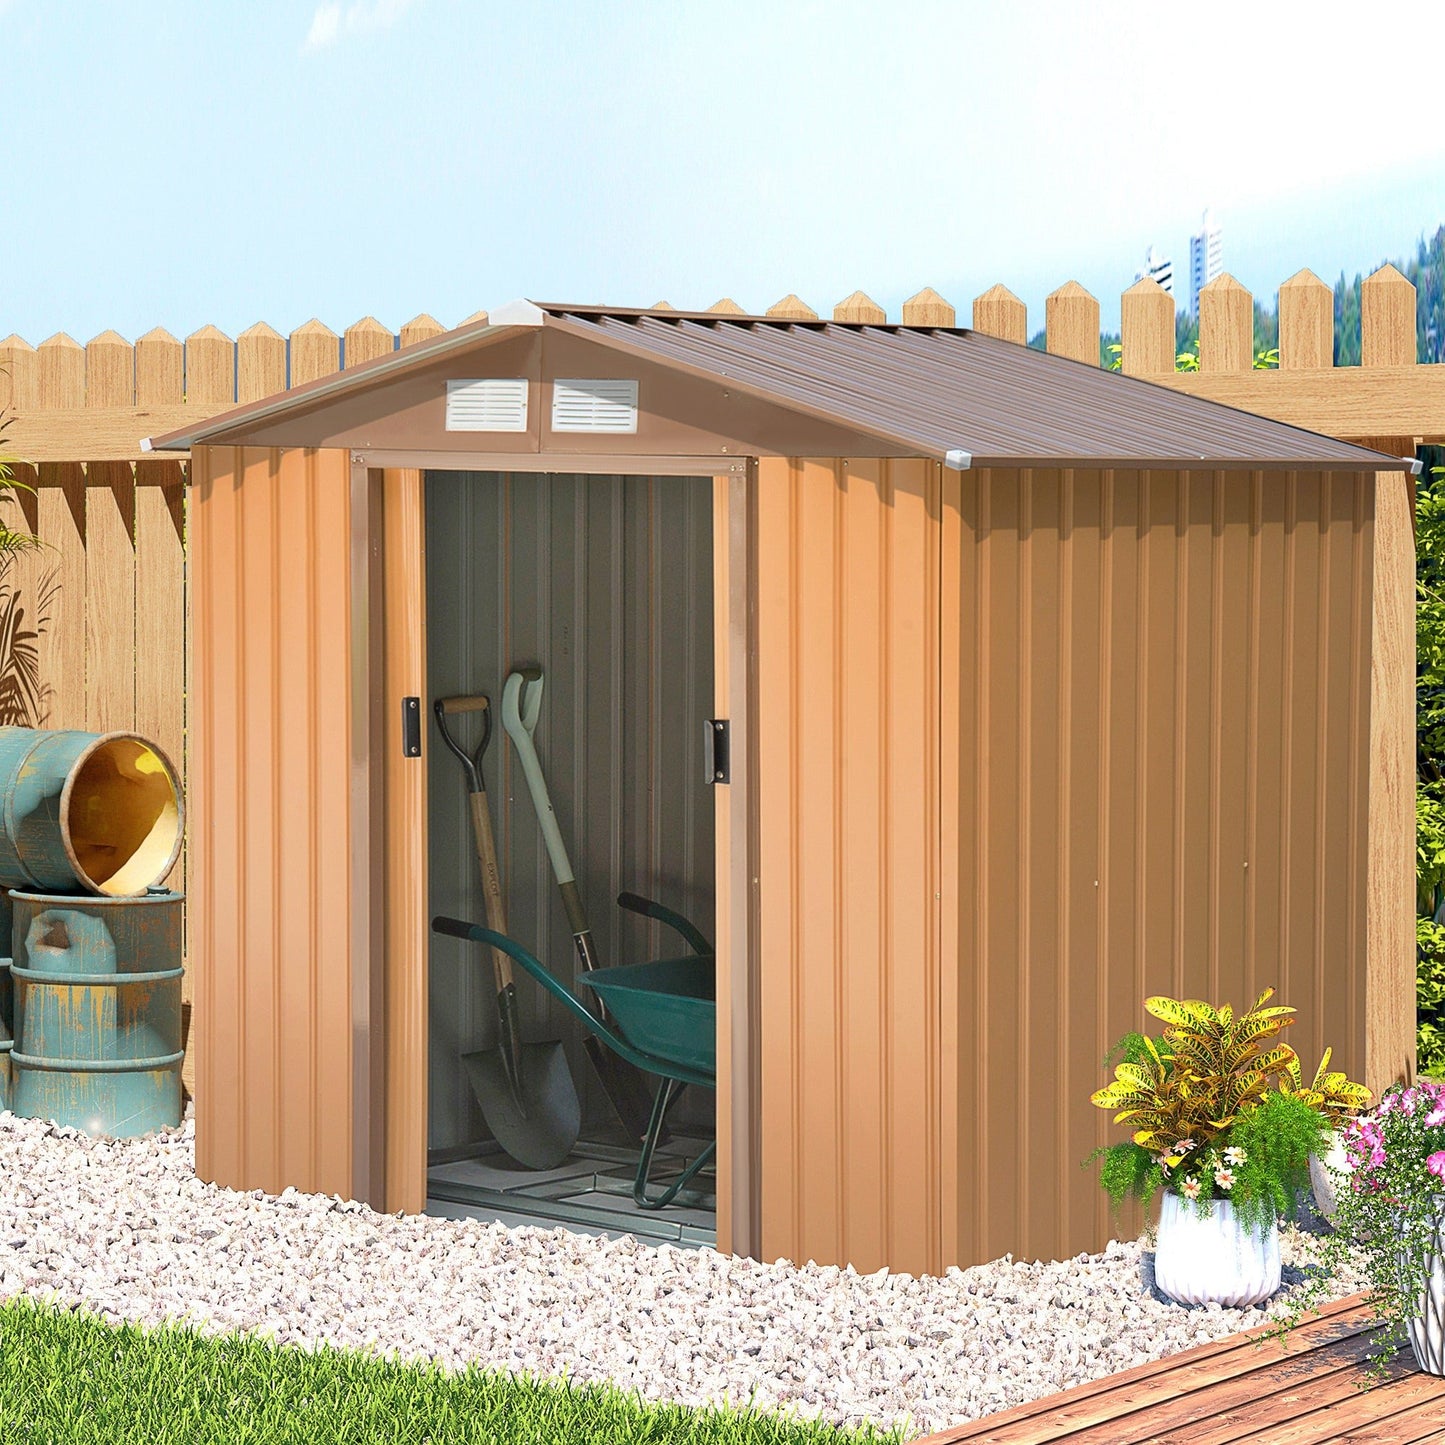 Outdoor and Garden-7' x 4' x 6' Metal Storage Shed & Tin Garden Shed with 4 Vents for Airflow & 2 Easy Sliding Doors, Brown - Outdoor Style Company